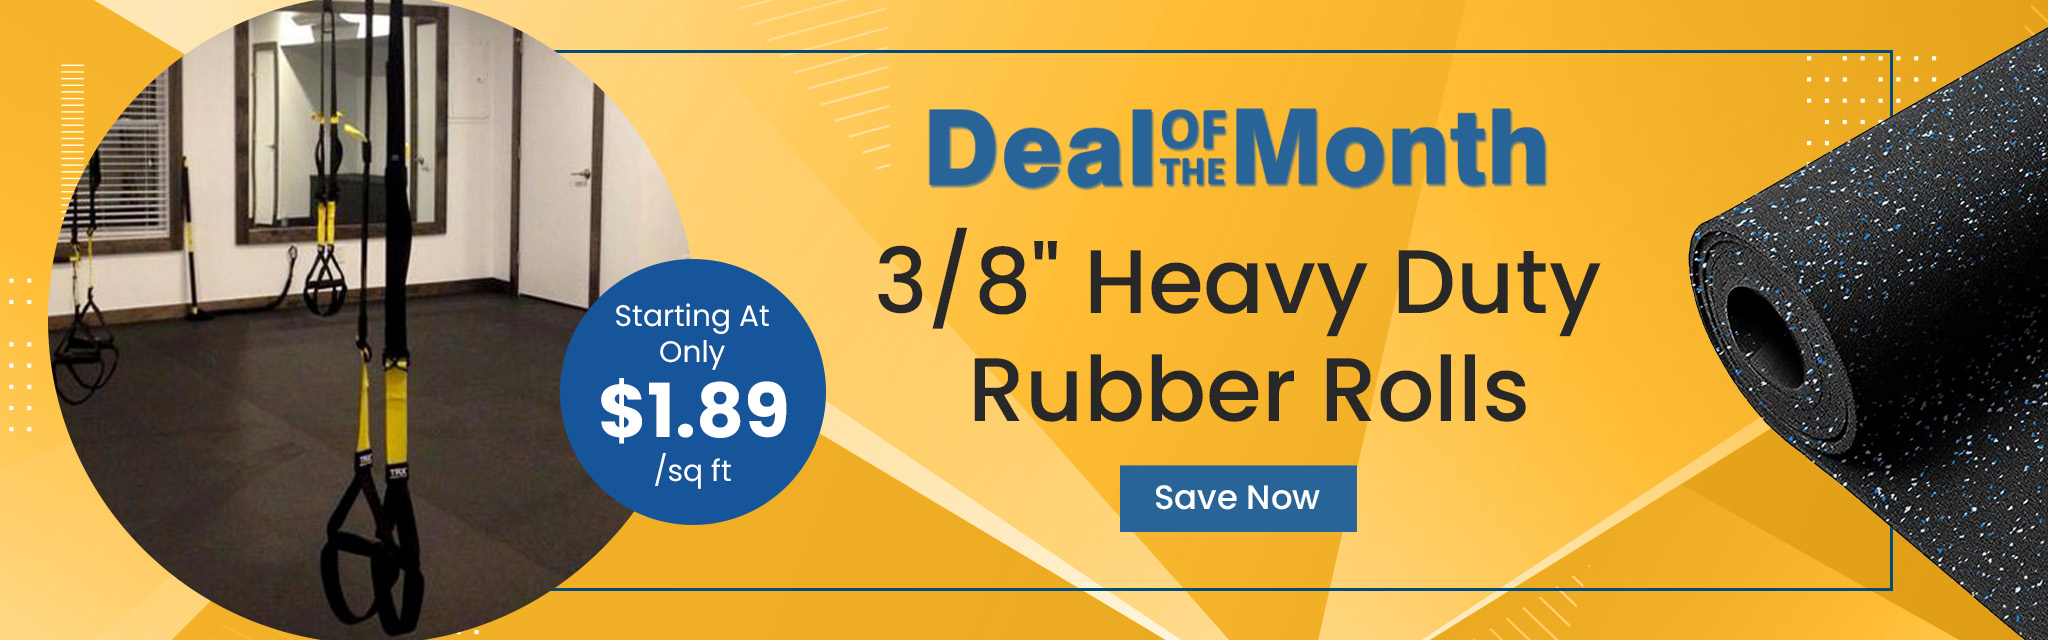 Deal Of The Month. 3/8" Heavy Duty Rubber Rolls. Starting At Only $1.89 per square feet. Save Now